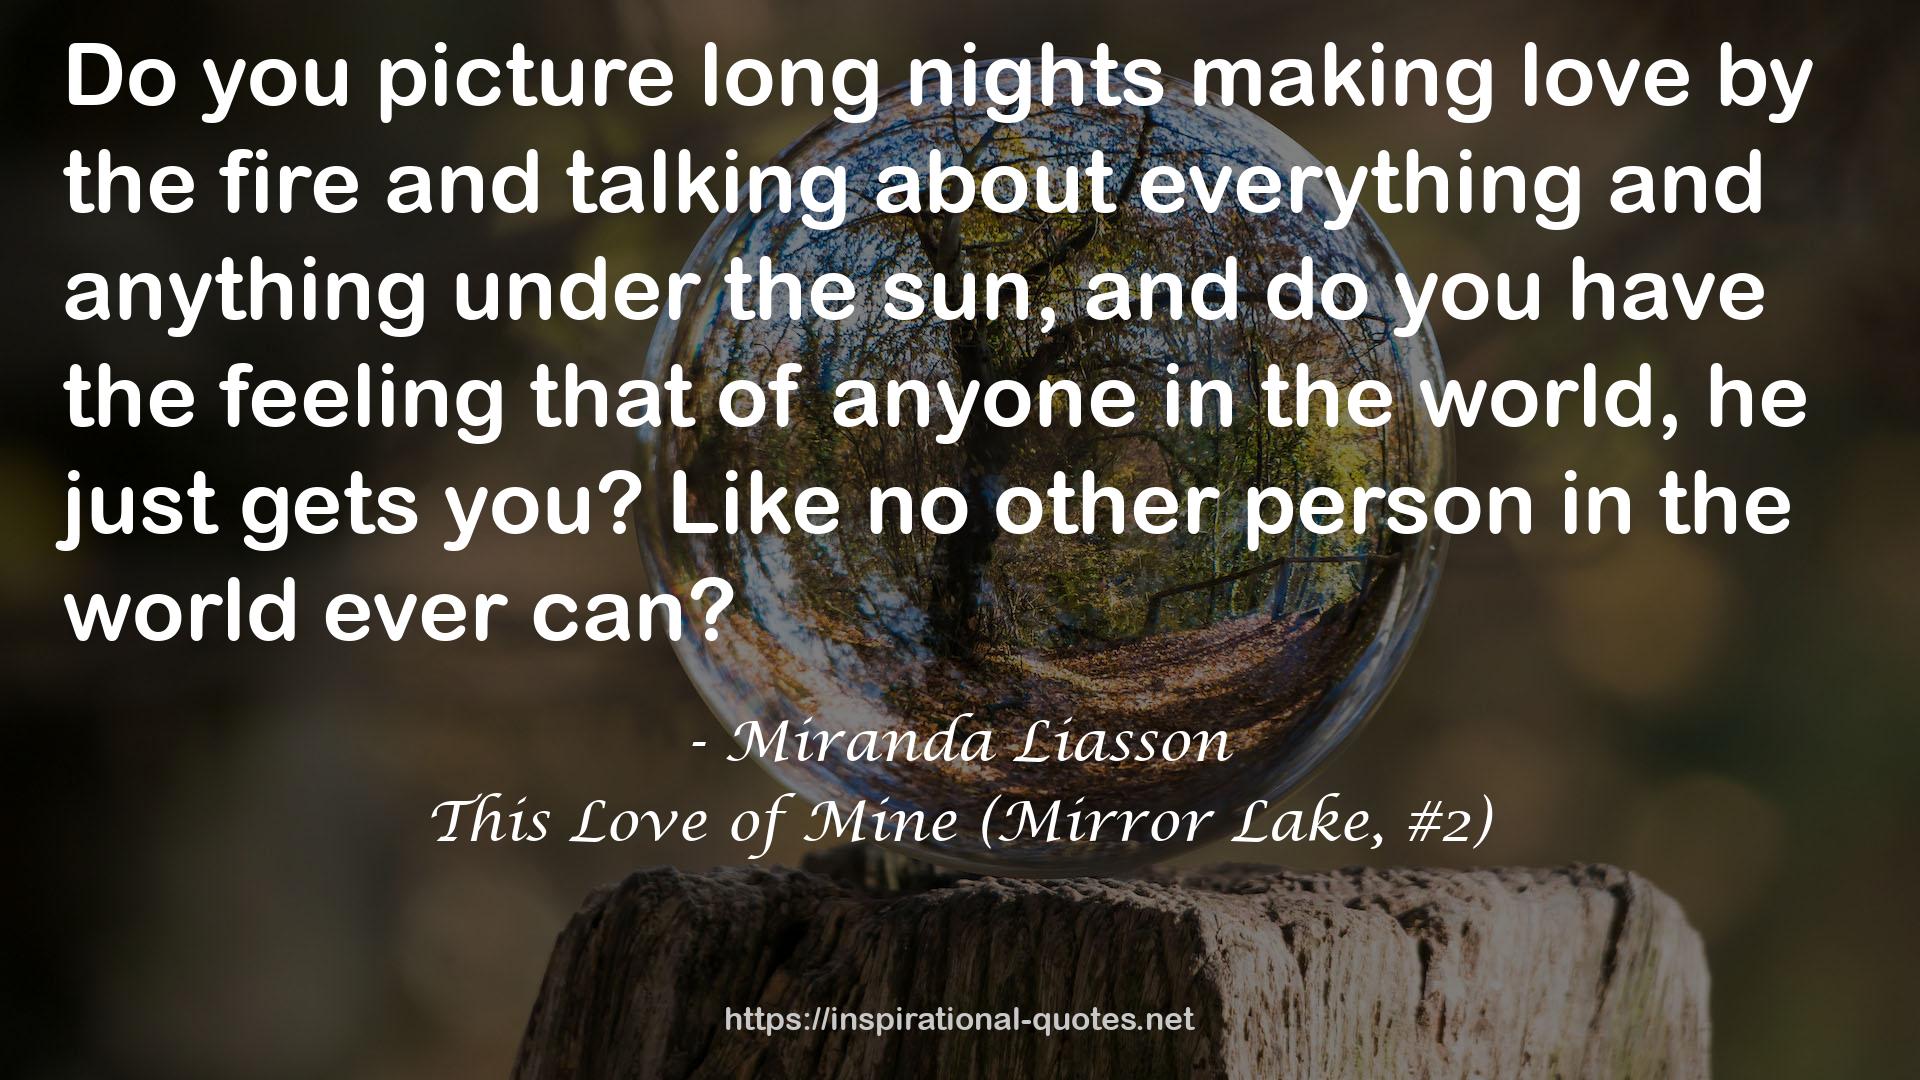 This Love of Mine (Mirror Lake, #2) QUOTES